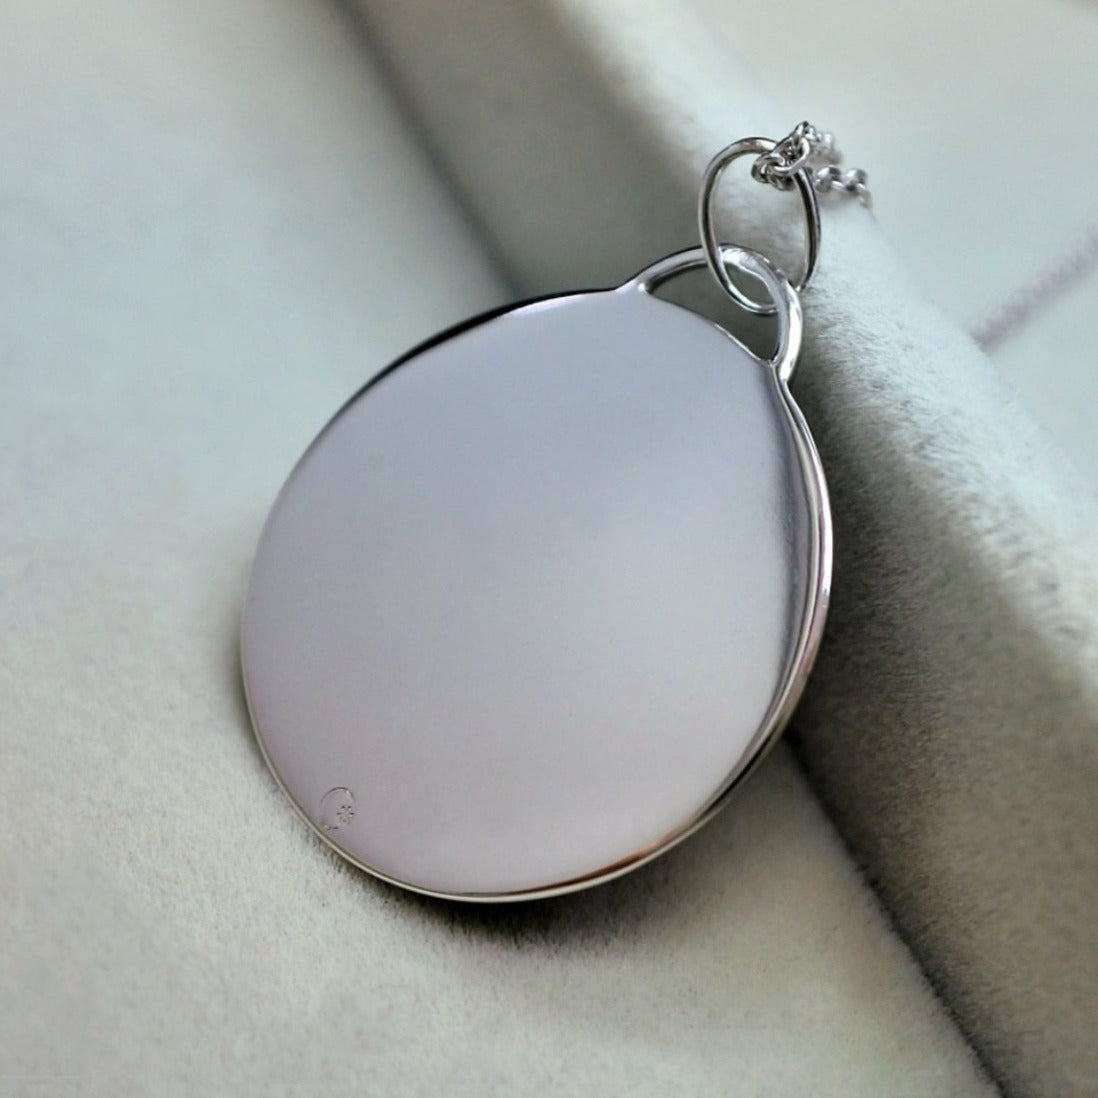 medic alert ID circle pendant charm necklace for women men | white gold enamel | Charmed Medical Jewelry